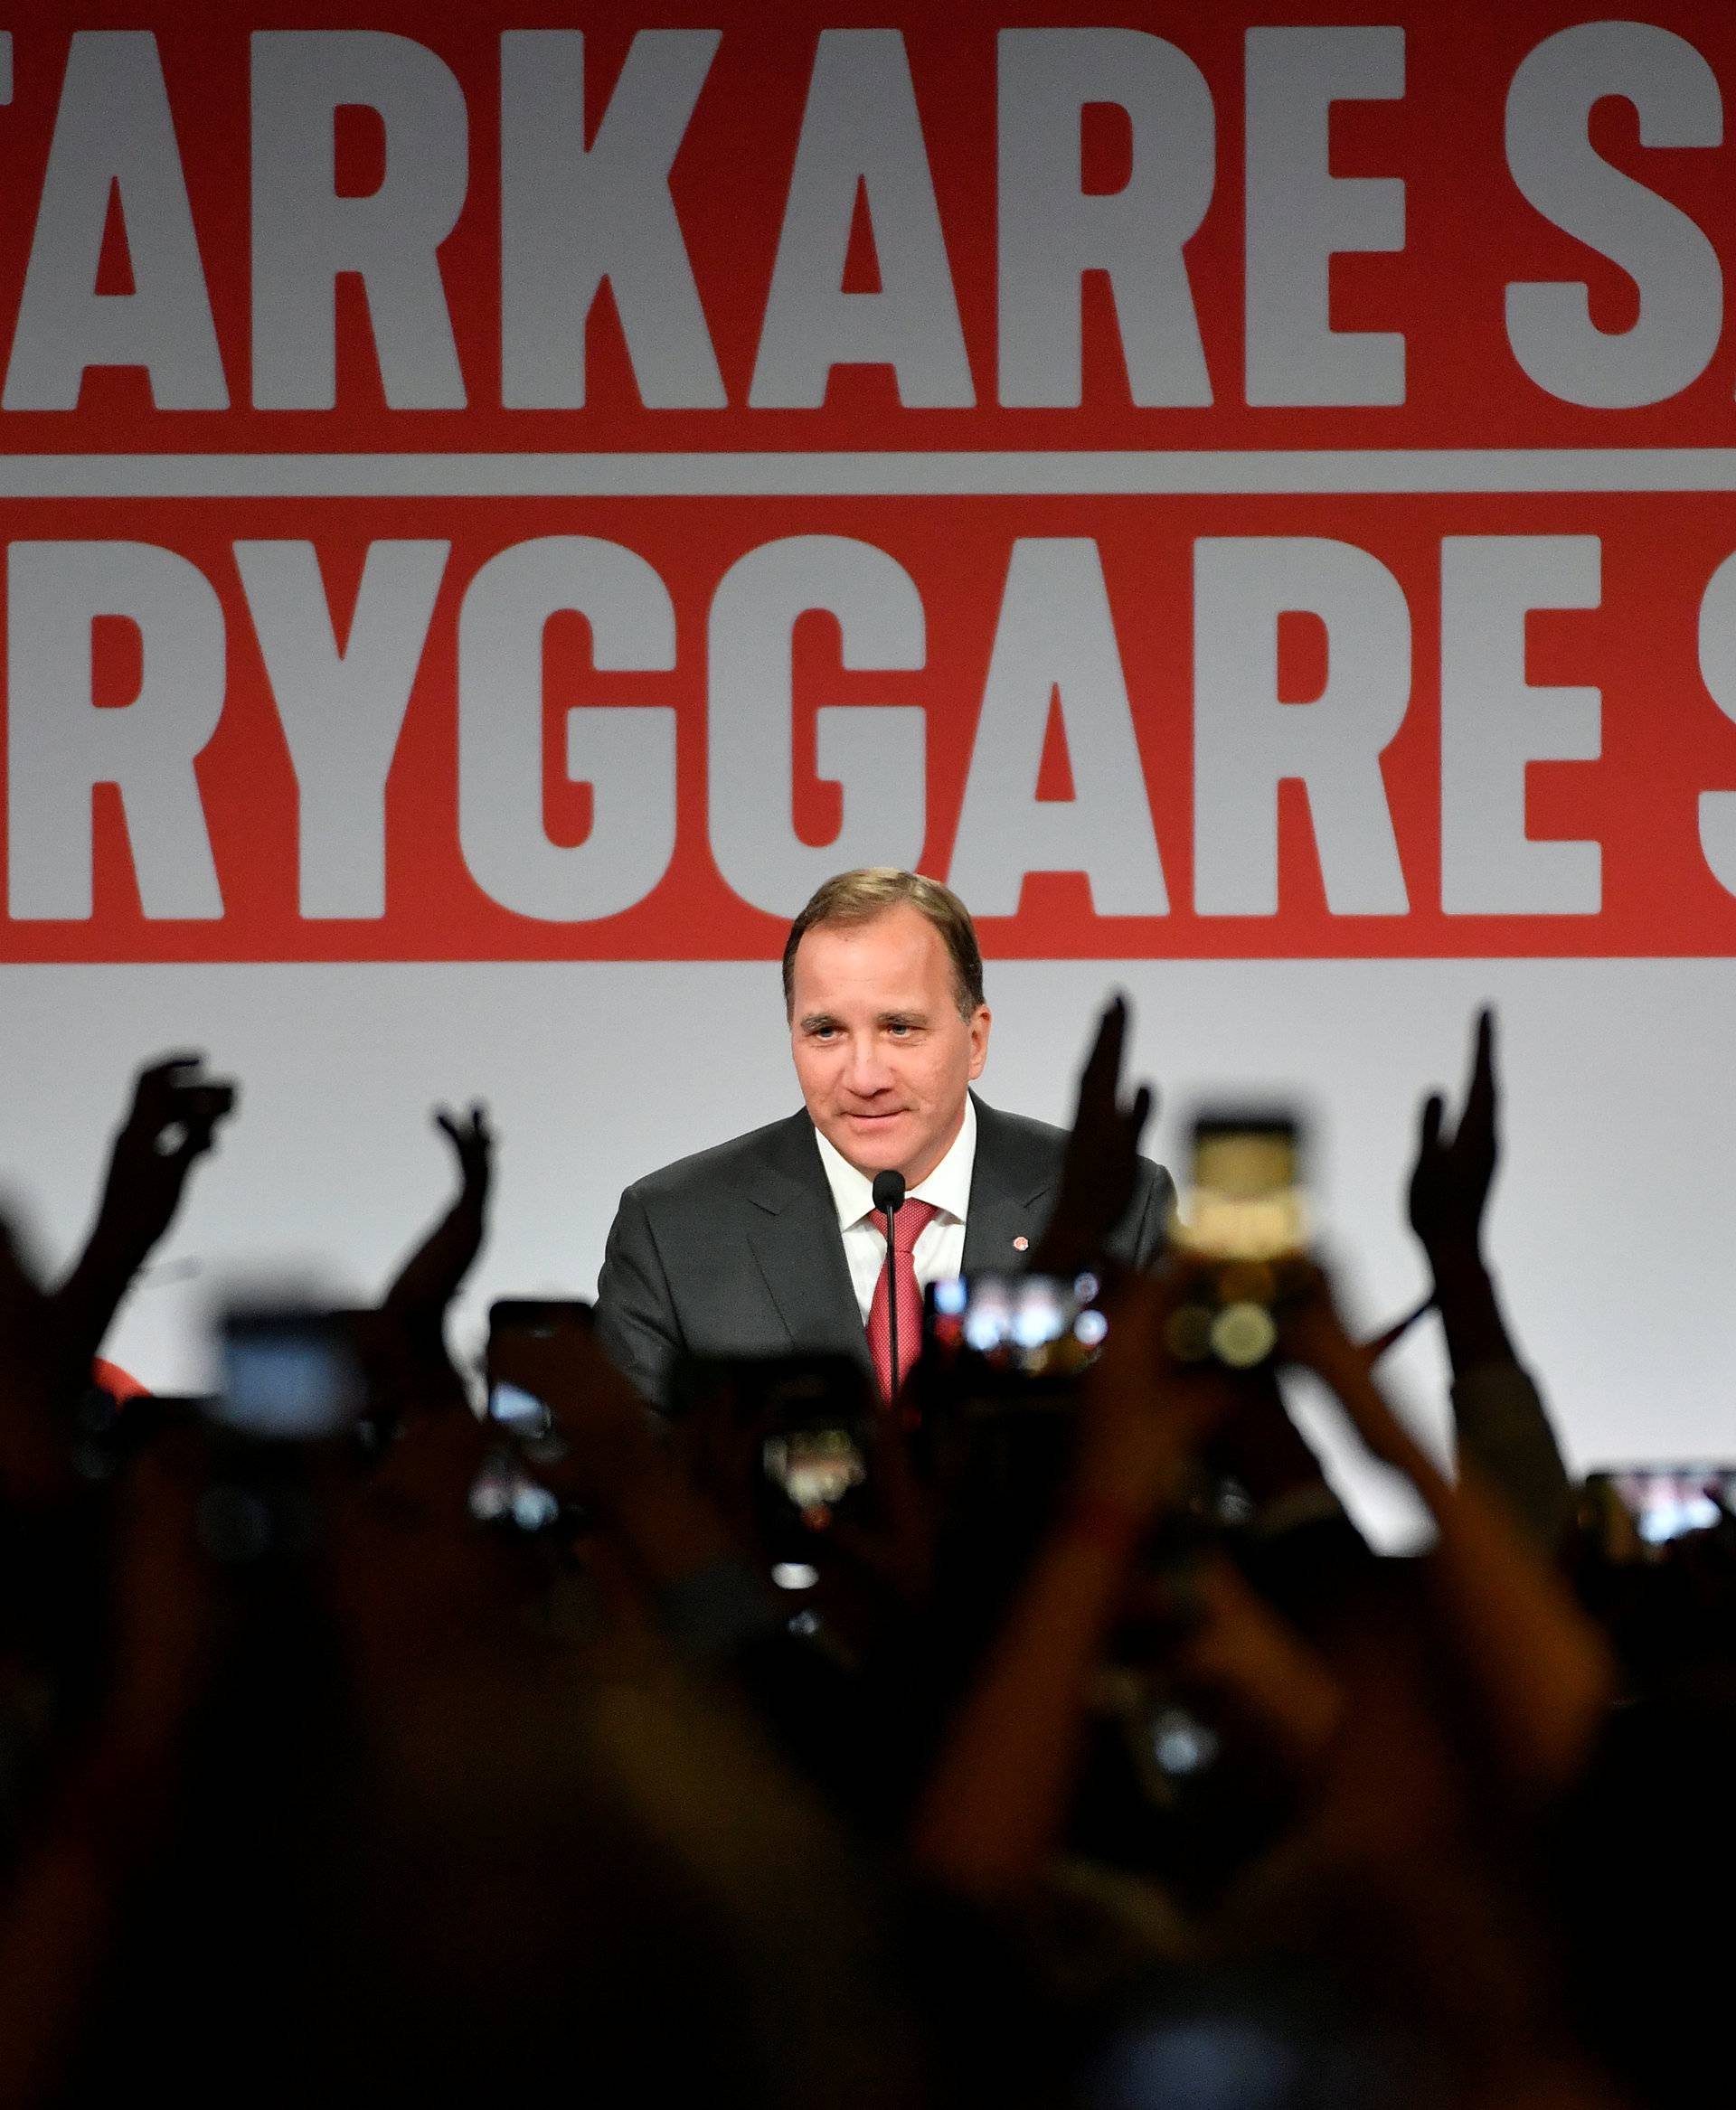 Sweden's Prime Minister and leader of the Social democrat party Stefan Lofven speaks at an election party at the Fargfabriken art hall in Stockholm